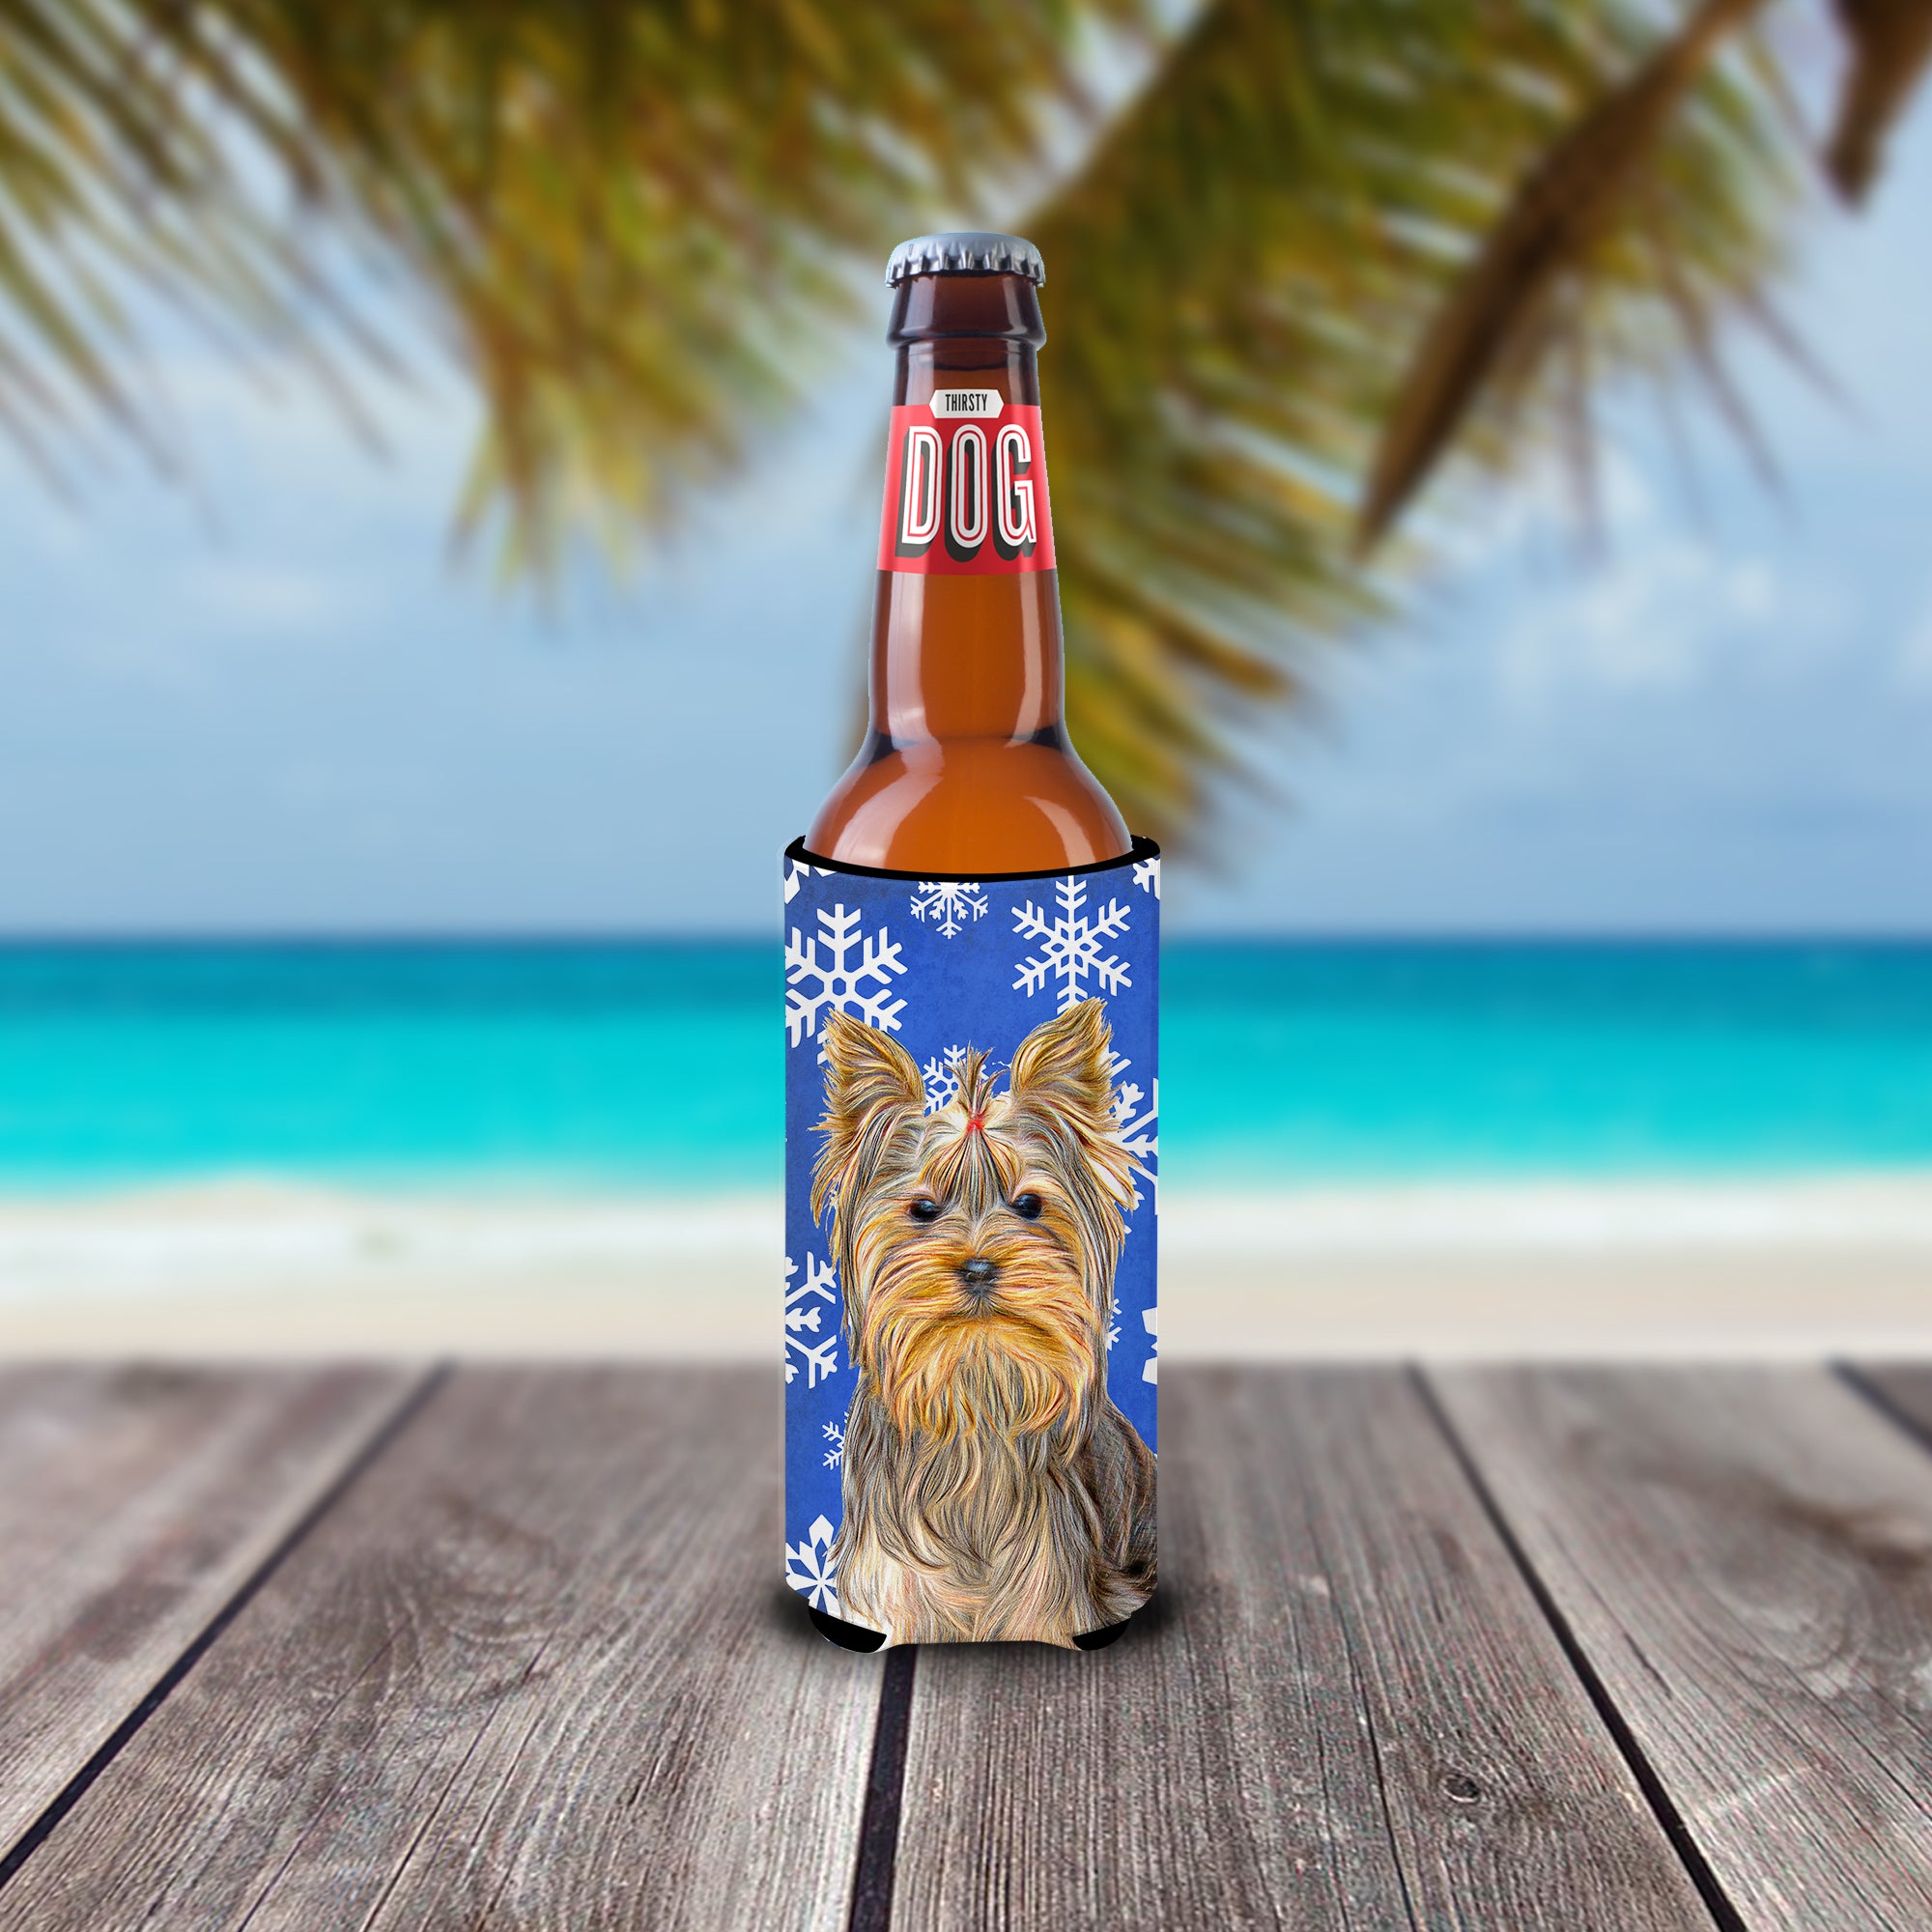 Winter Snowflakes Holiday Yorkie / Yorkshire Terrier Ultra Beverage Insulators for slim cans KJ1177MUK.